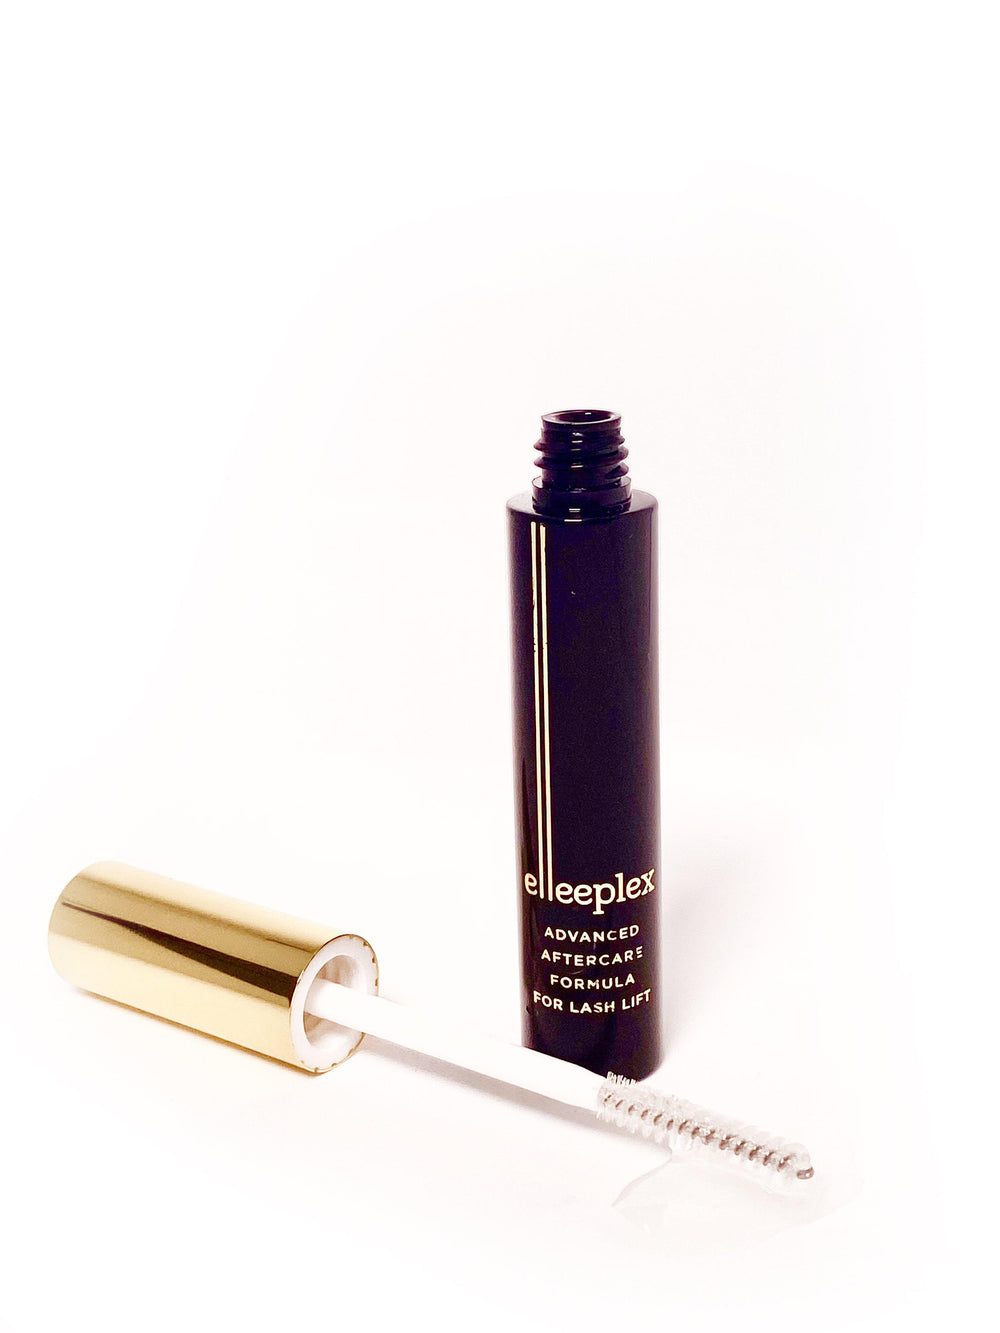 Elleebana's Elleeplex Advanced After Care Formula for Lash Lift and a brush on a white surface.